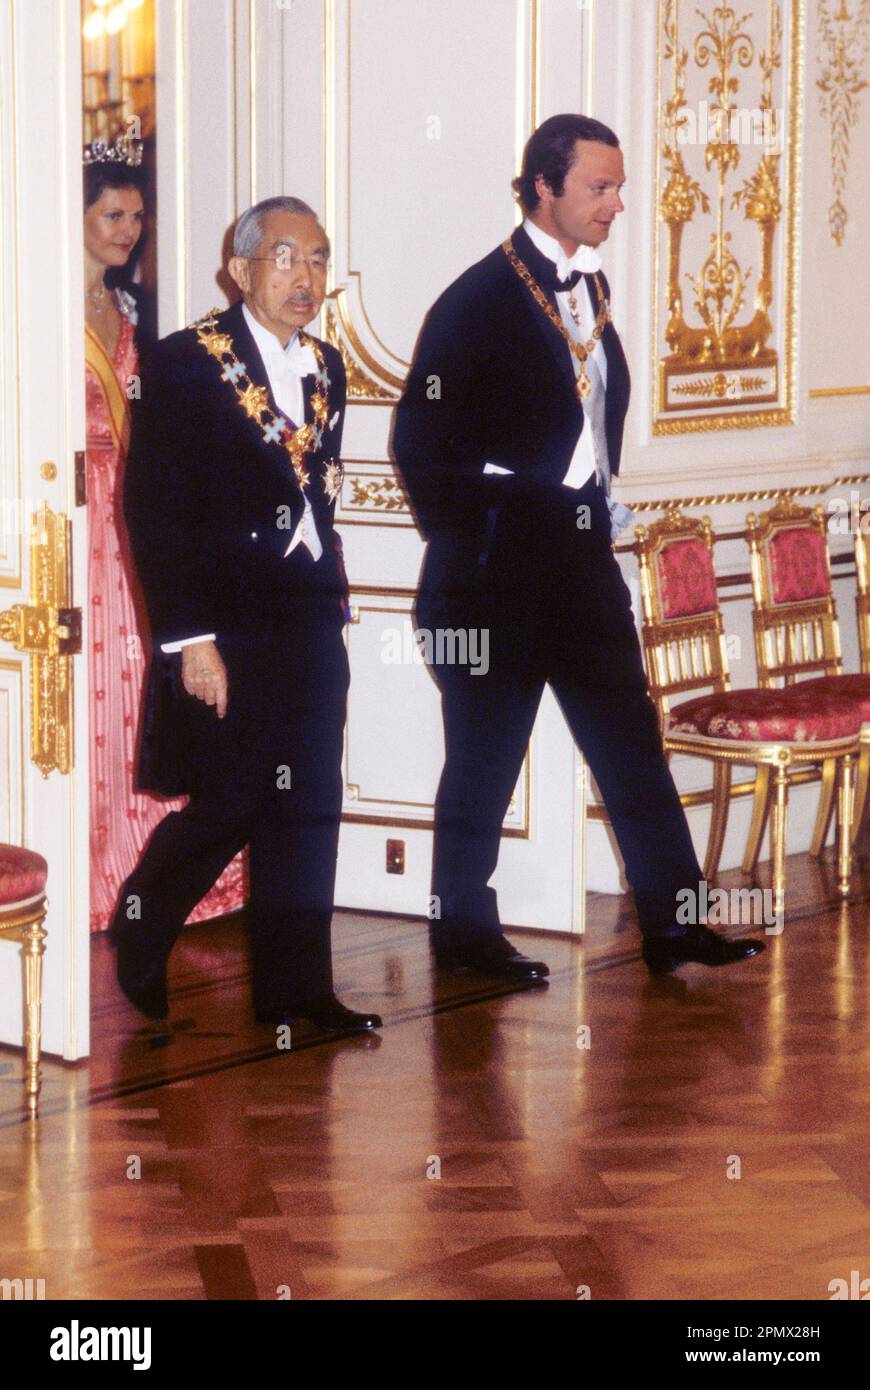 KING CARL XVI GUSTAF of Sweden with Japan Crown Prince AKIHITO during State visit to Stockholm Sweden Stock Photo